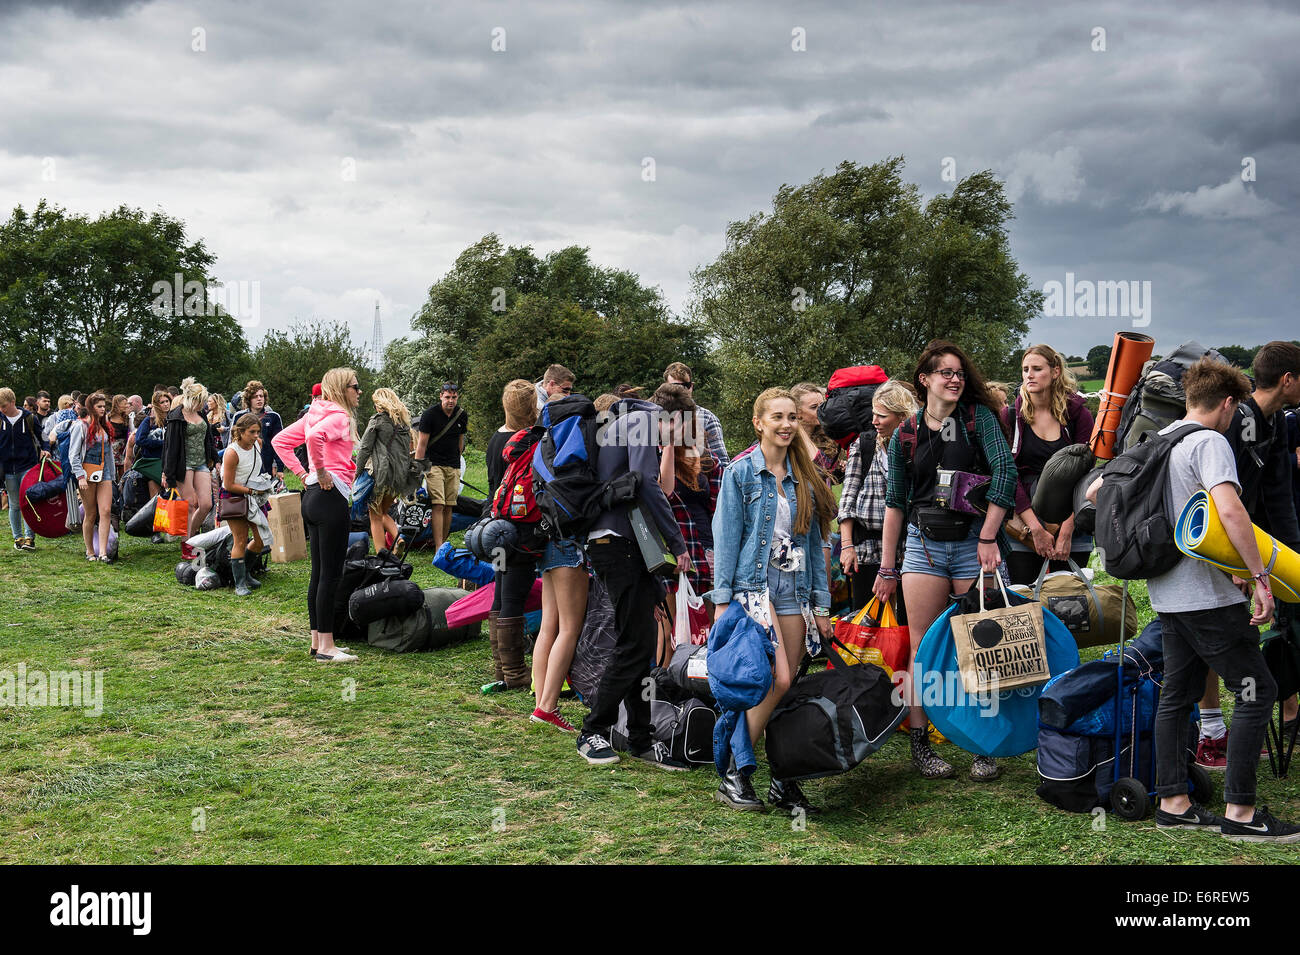 Young people queue to gain access to a music festival. Stock Photo